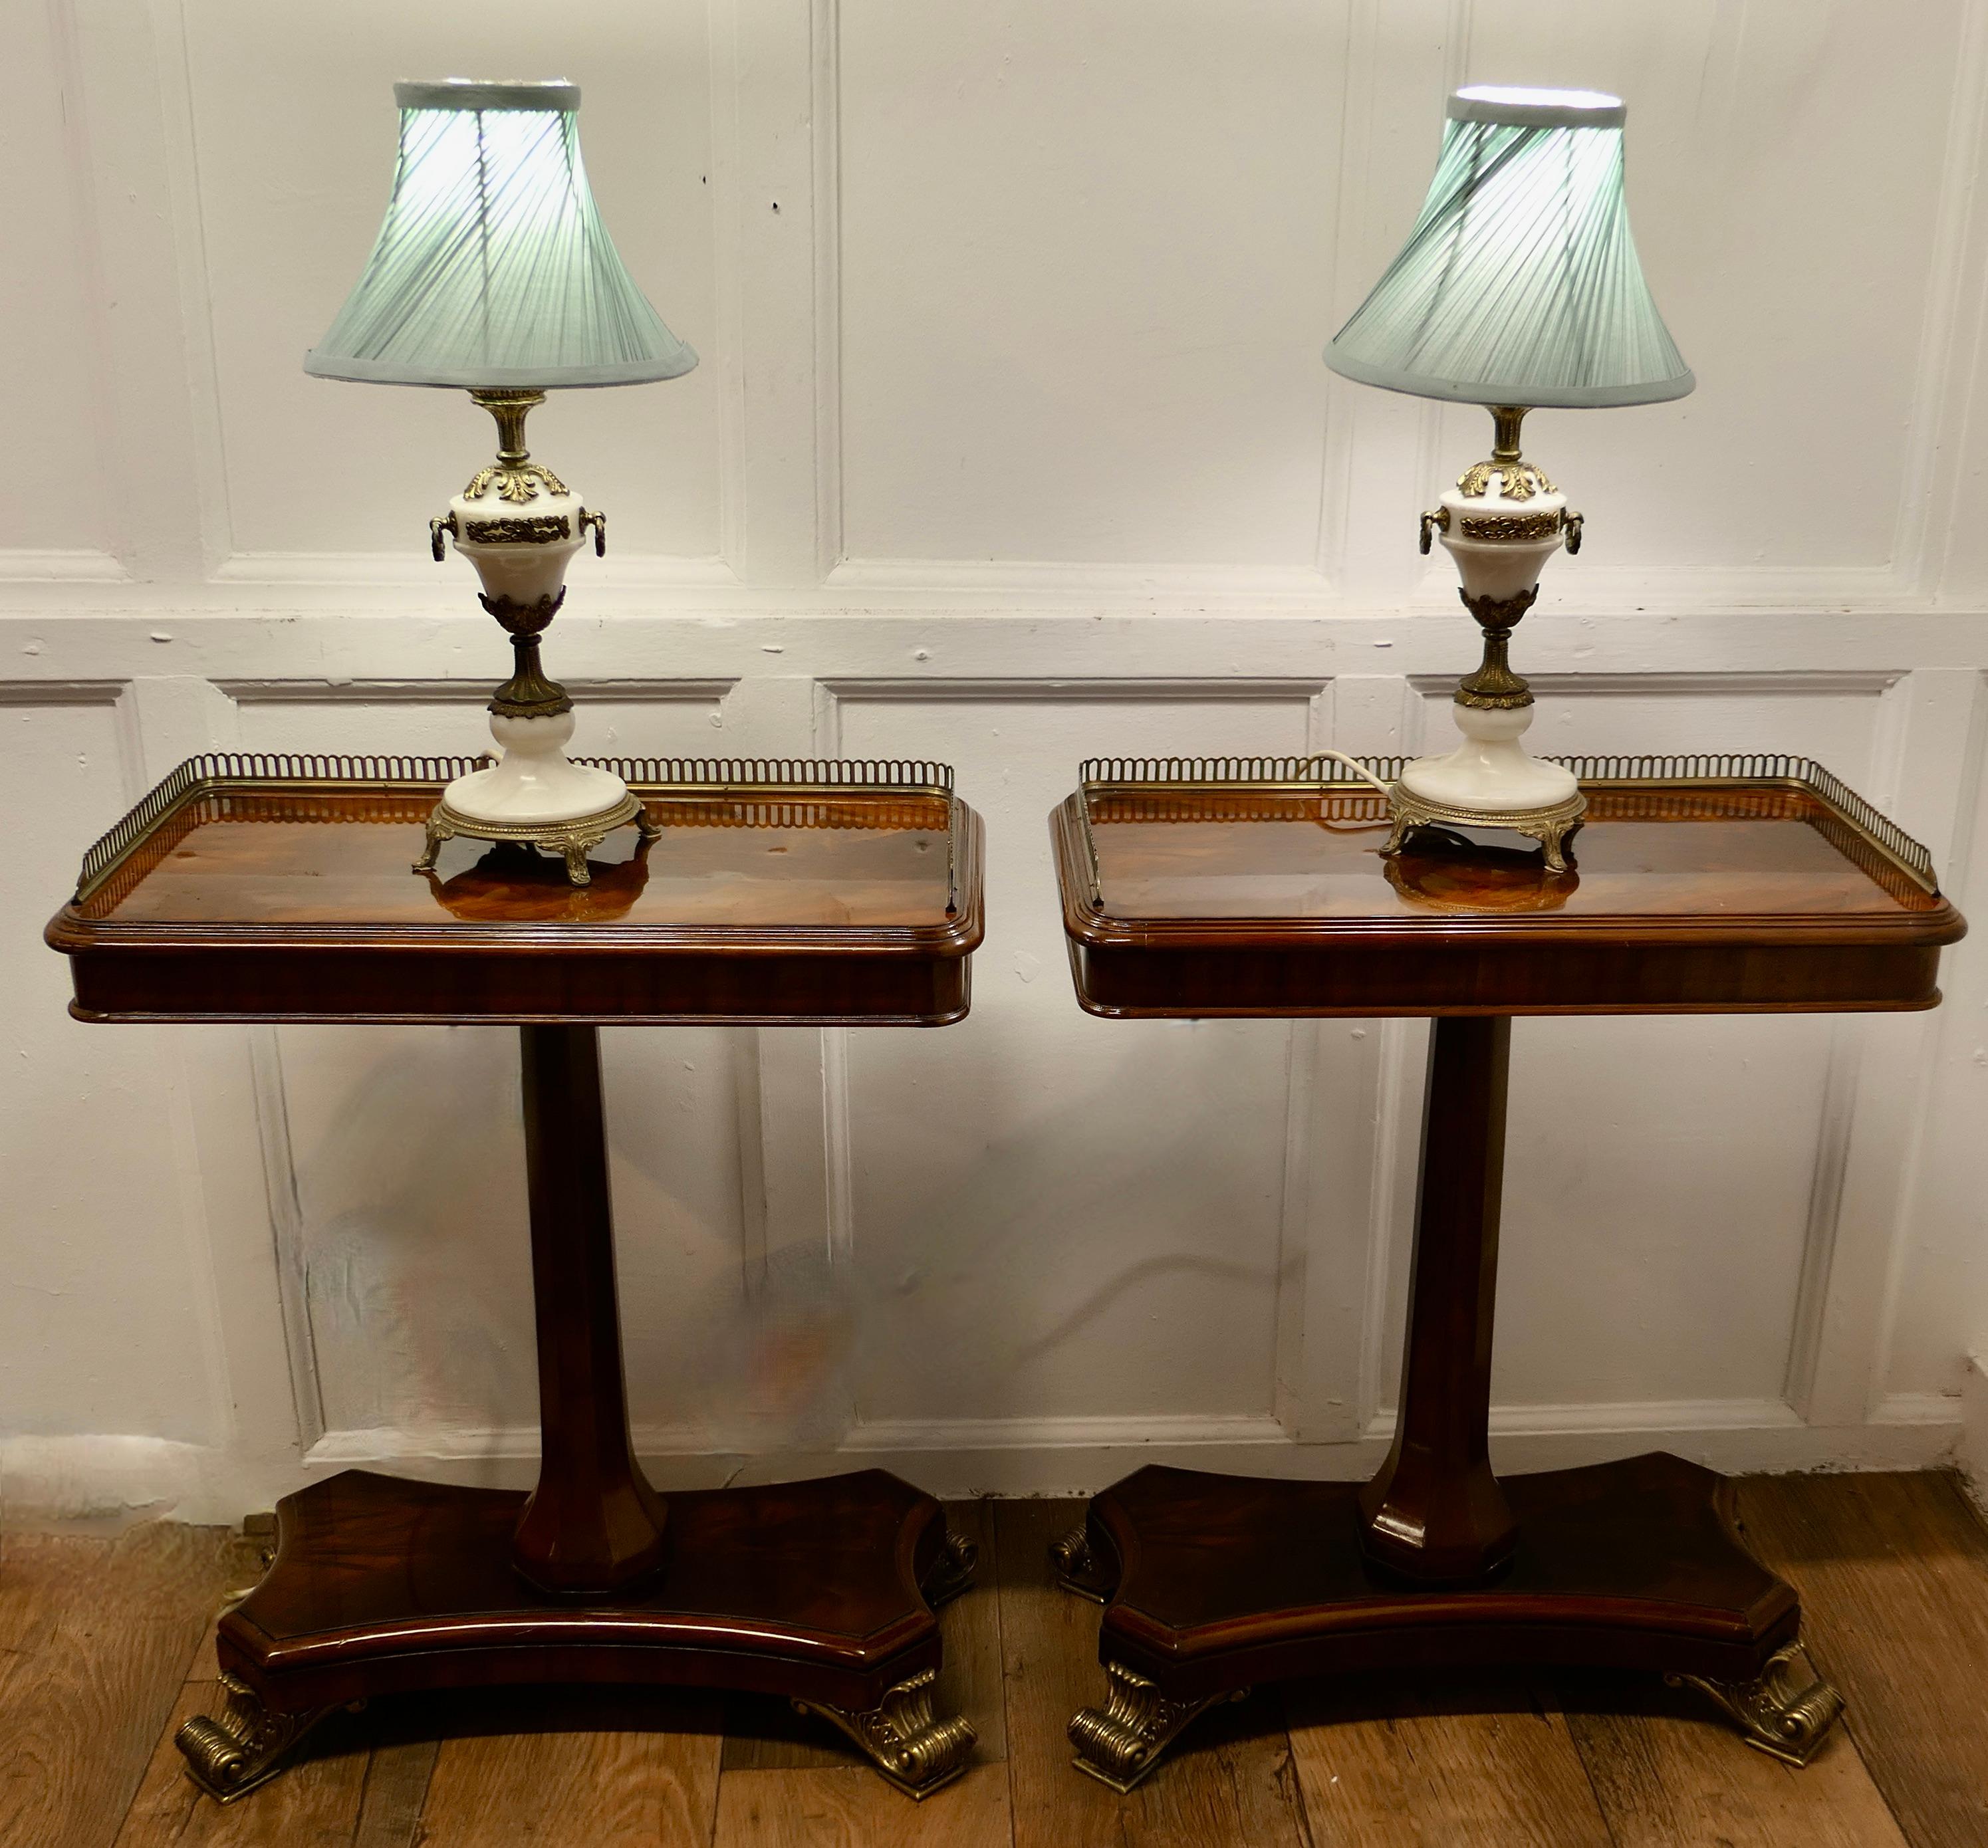 A Pair of White Marble and Ormolu Classical Greek Style Table Lamp

These are heavy little lamps made in solid marble with ormolu mounts,  the lamps are set on small feet with a bulbous pillar 
These lamps are in good condition with a very minor